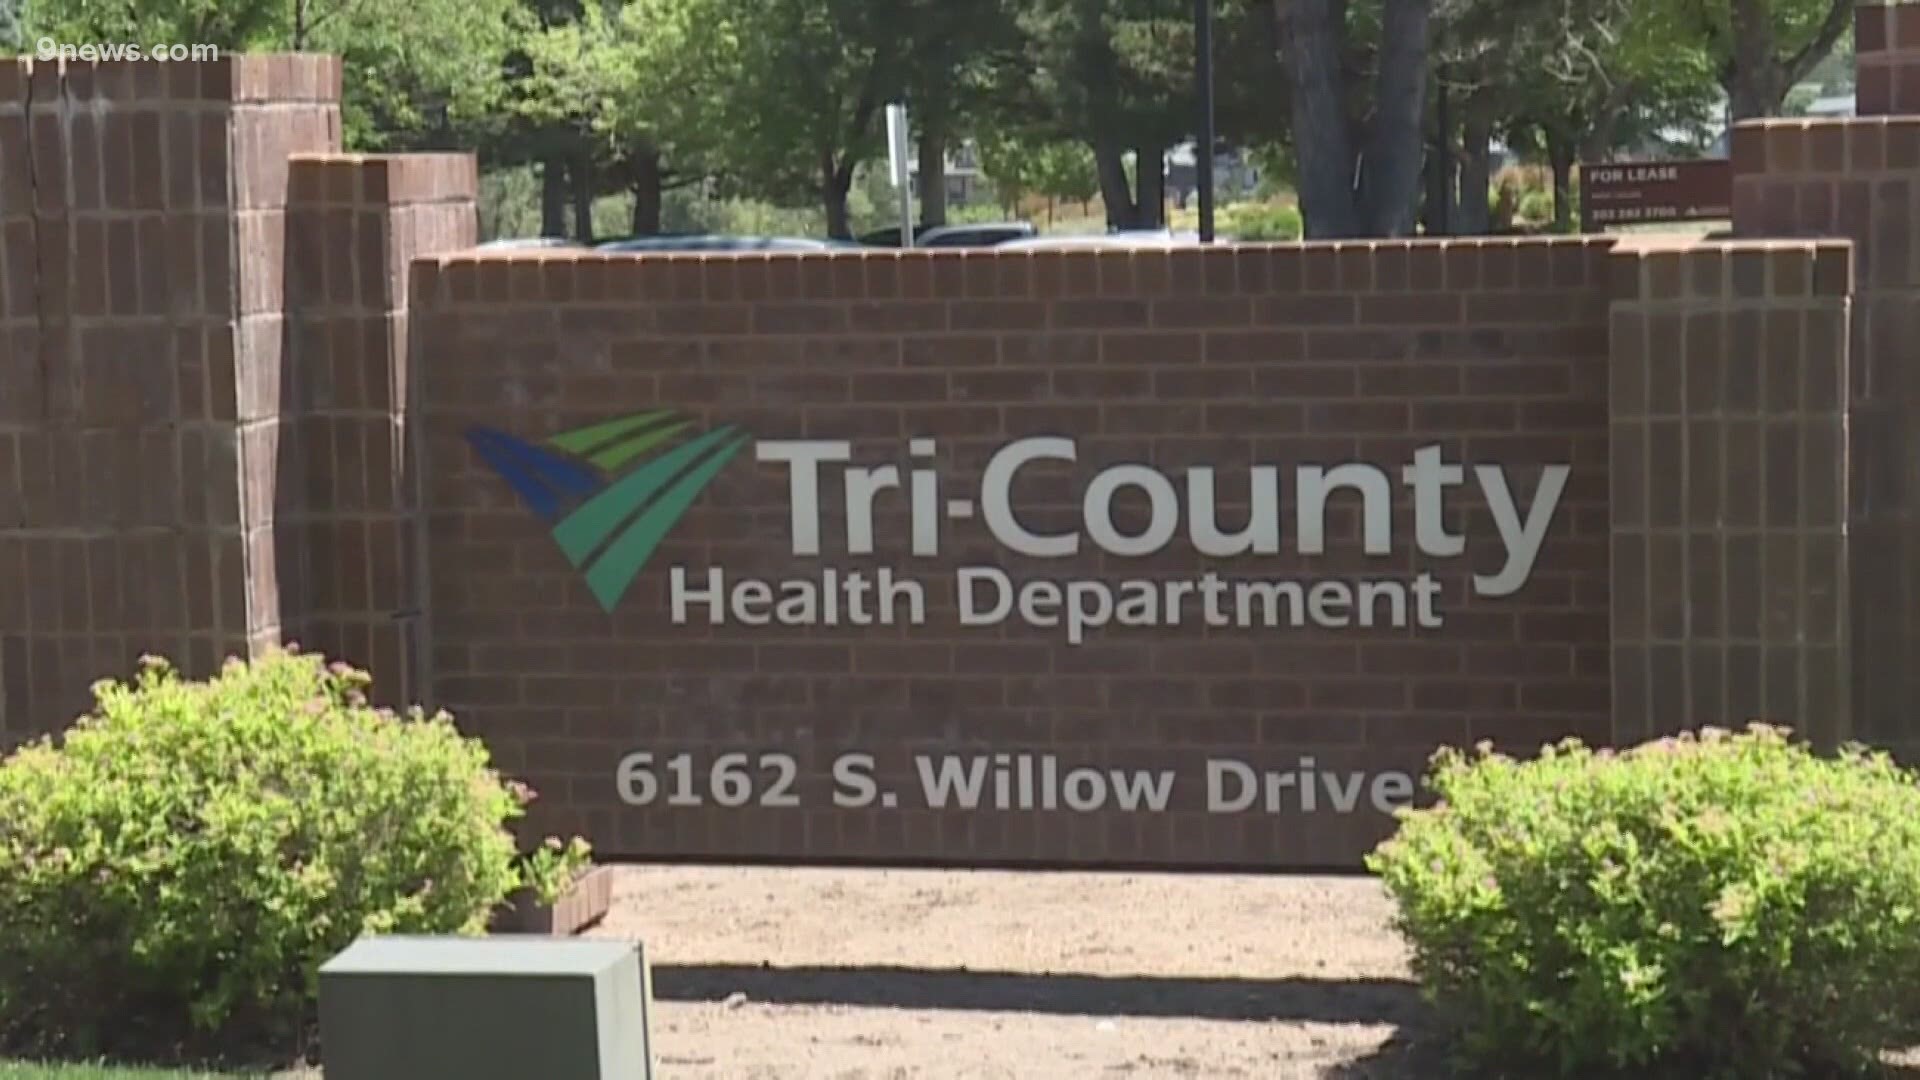 Those health departments are teaming up for a plan they are calling "Level Clear" after the state's colorful and often confusing COVID dial.